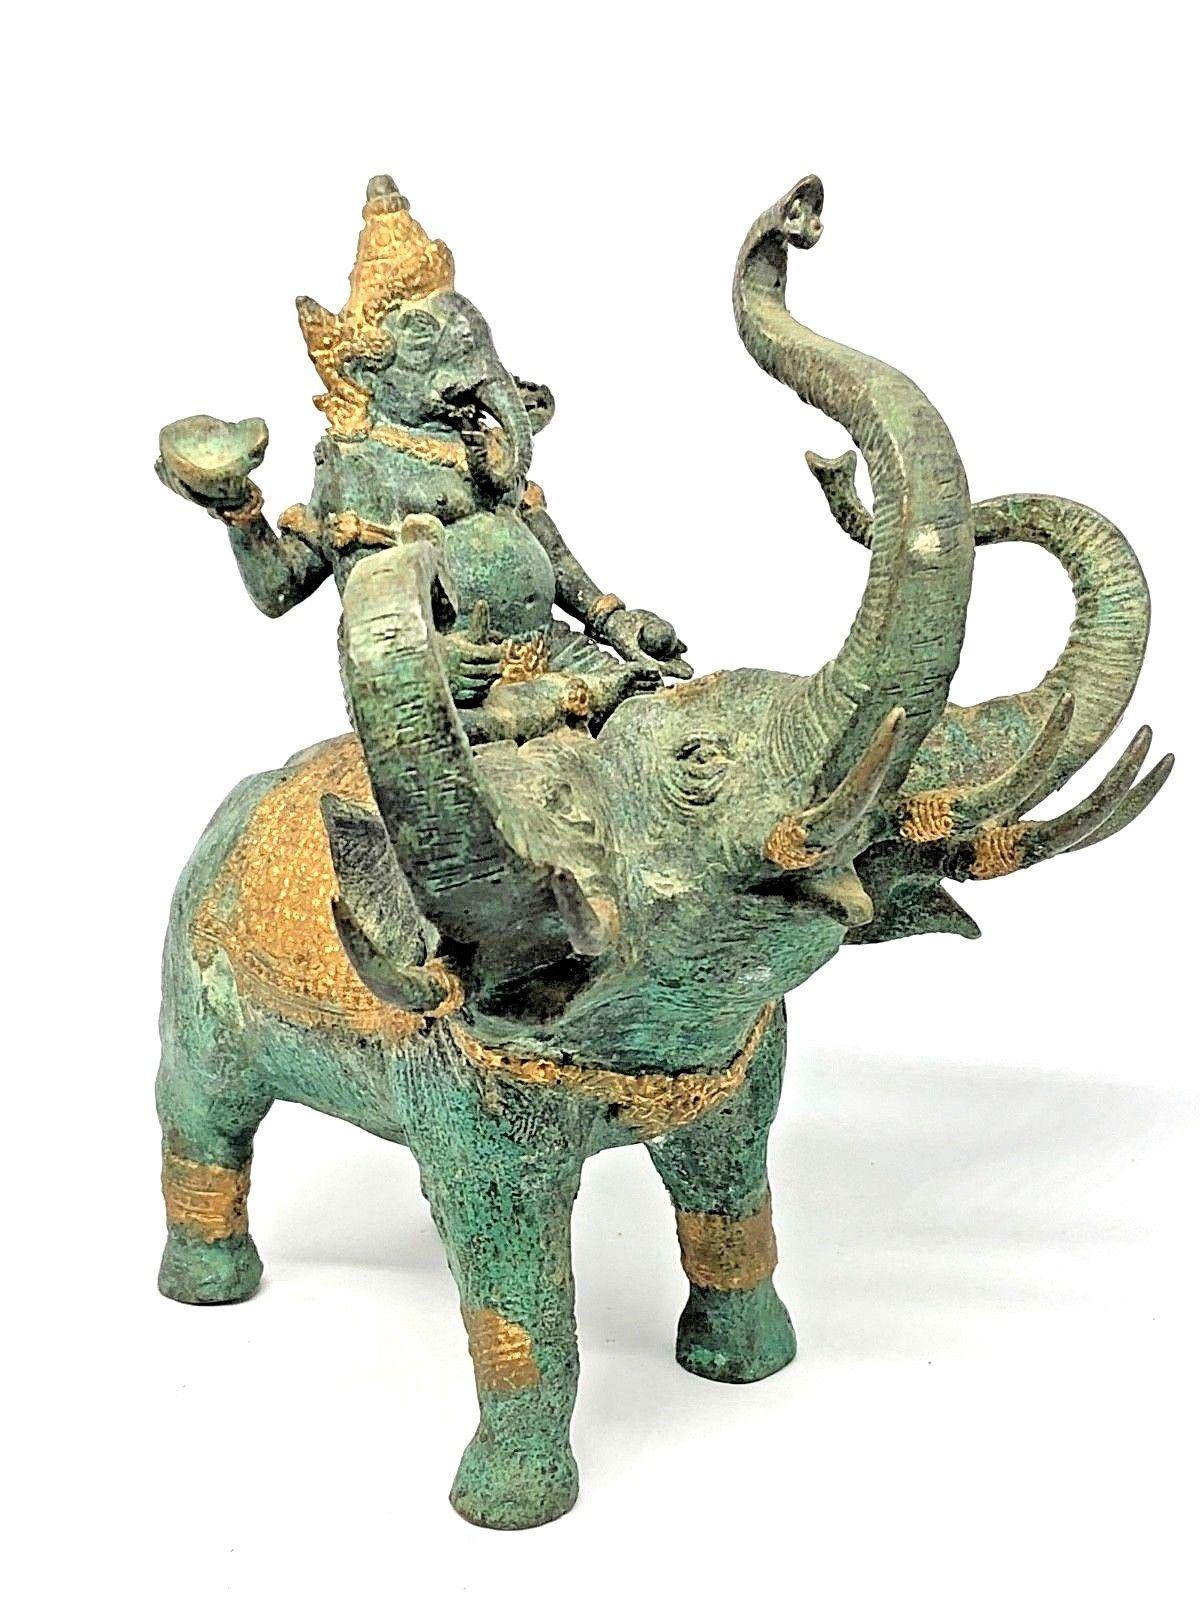 Hand-Crafted Ganesha Ridding Elephant Sculpture Statue Vintage 1950s India